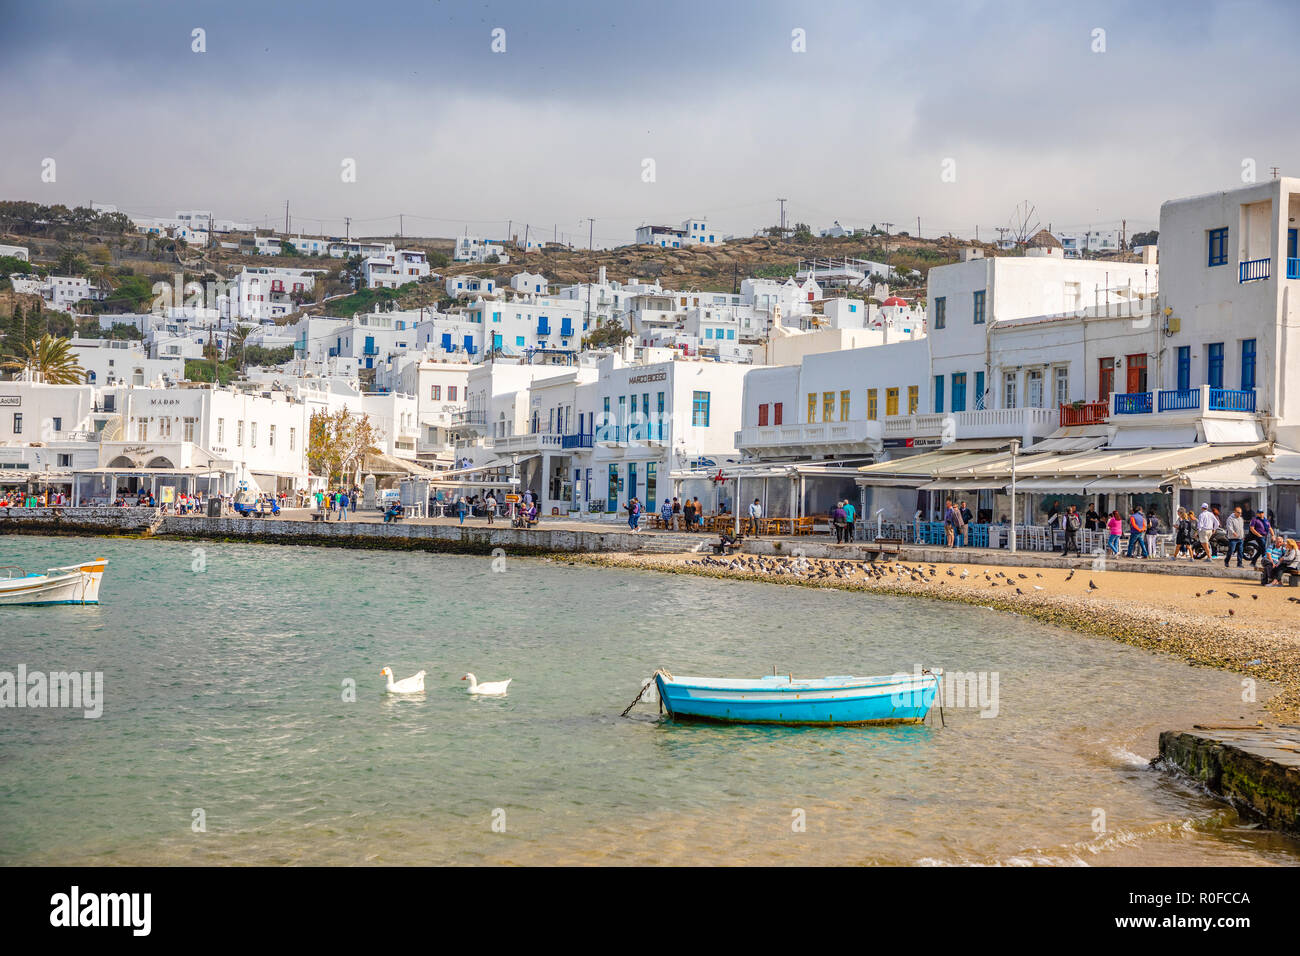 Mykonos, Greece - 17.10.2018: Port of Mykonos Town with white arhitecture and colorfull boats, Greece Stock Photo